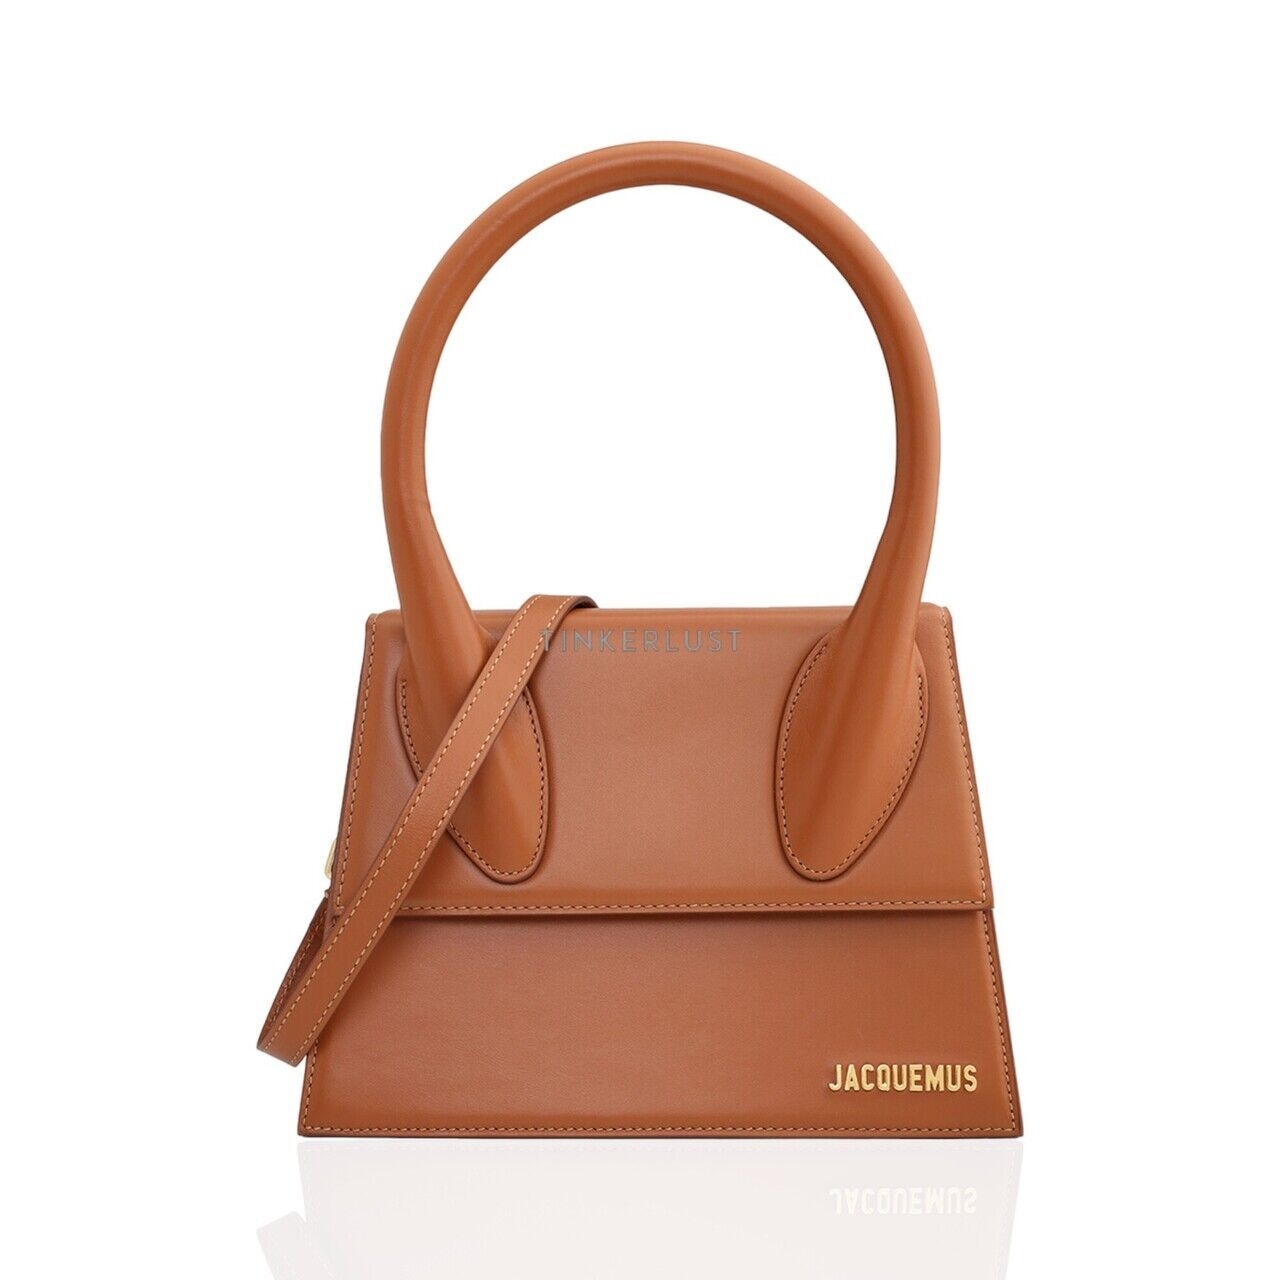 Jacquemus Le Grand Chiquito in Light Brown Smooth Leather Satchel Bag